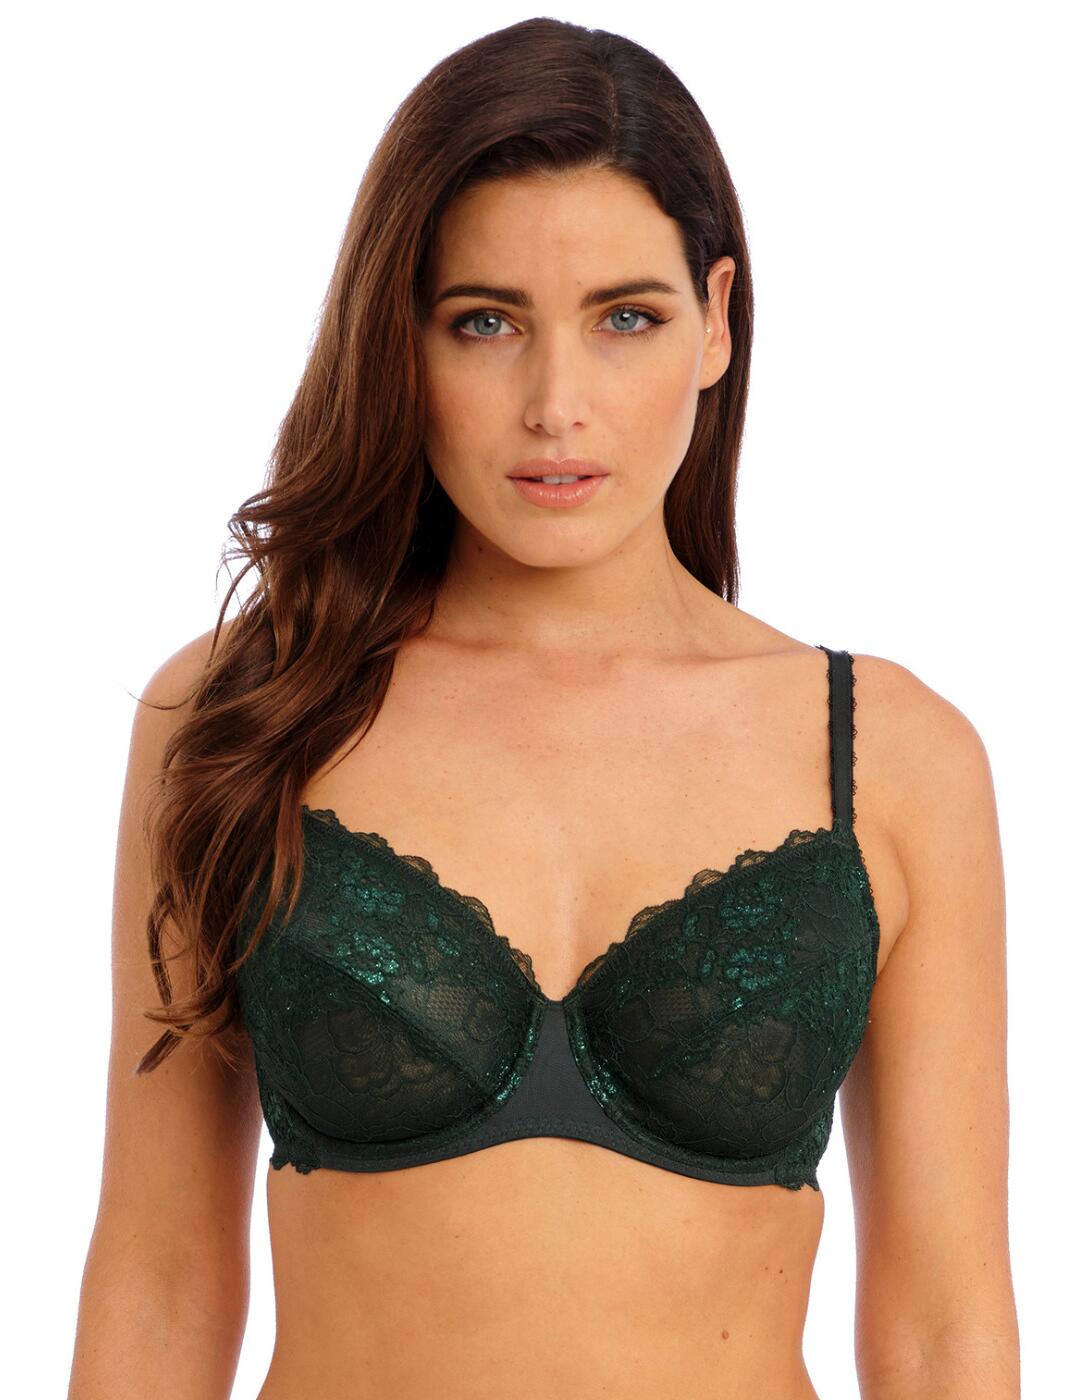 135002 Wacoal Lace Perfection Underwired Bra - 135002 Botanical Green